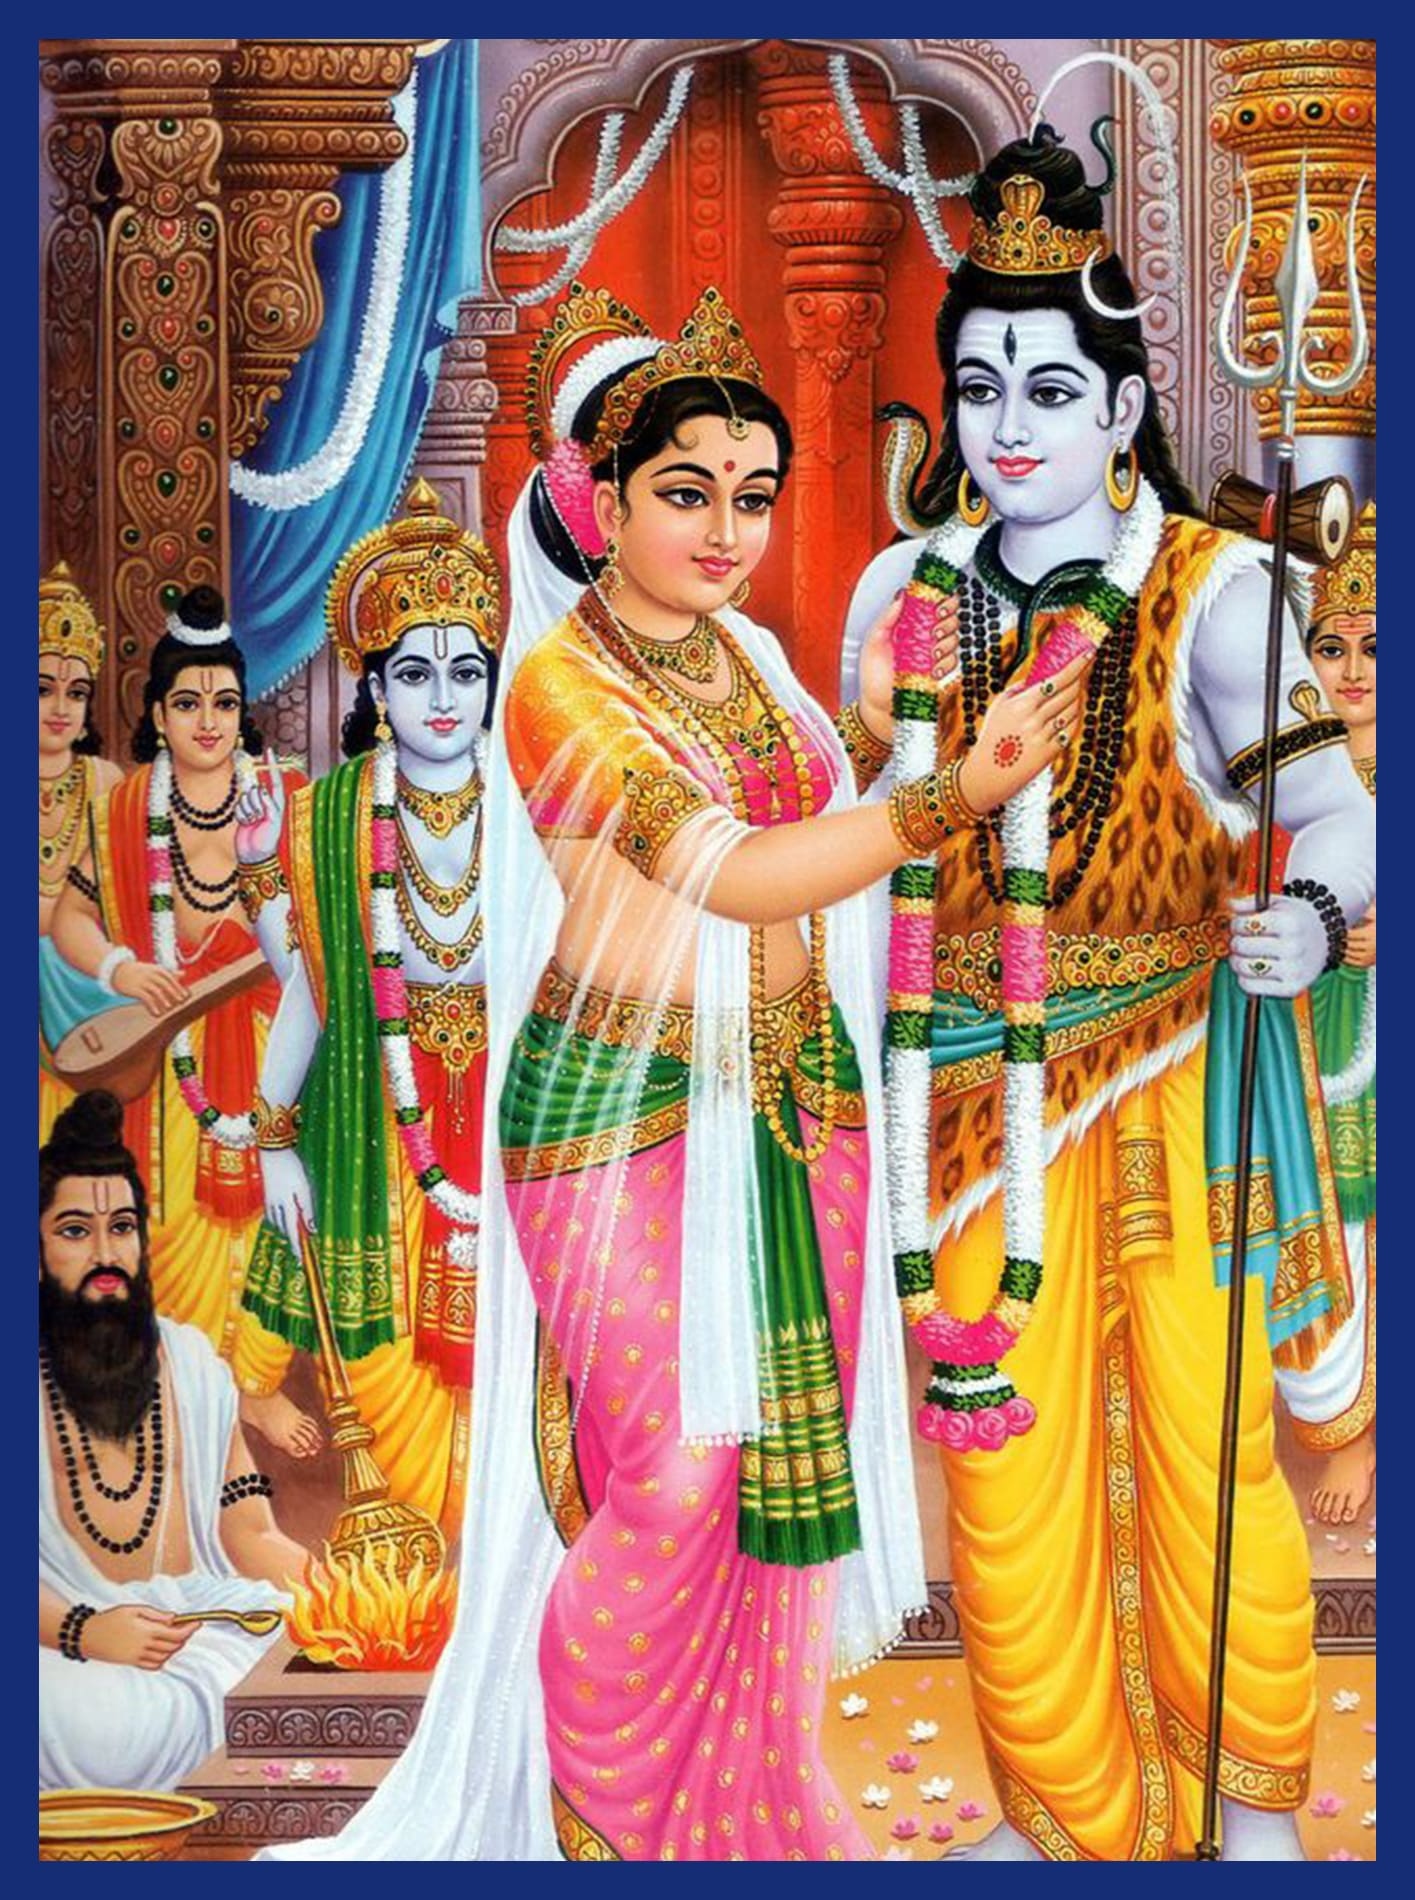 Sivan Images - Lord Shiva - Goddess Parvati - Marriage Background